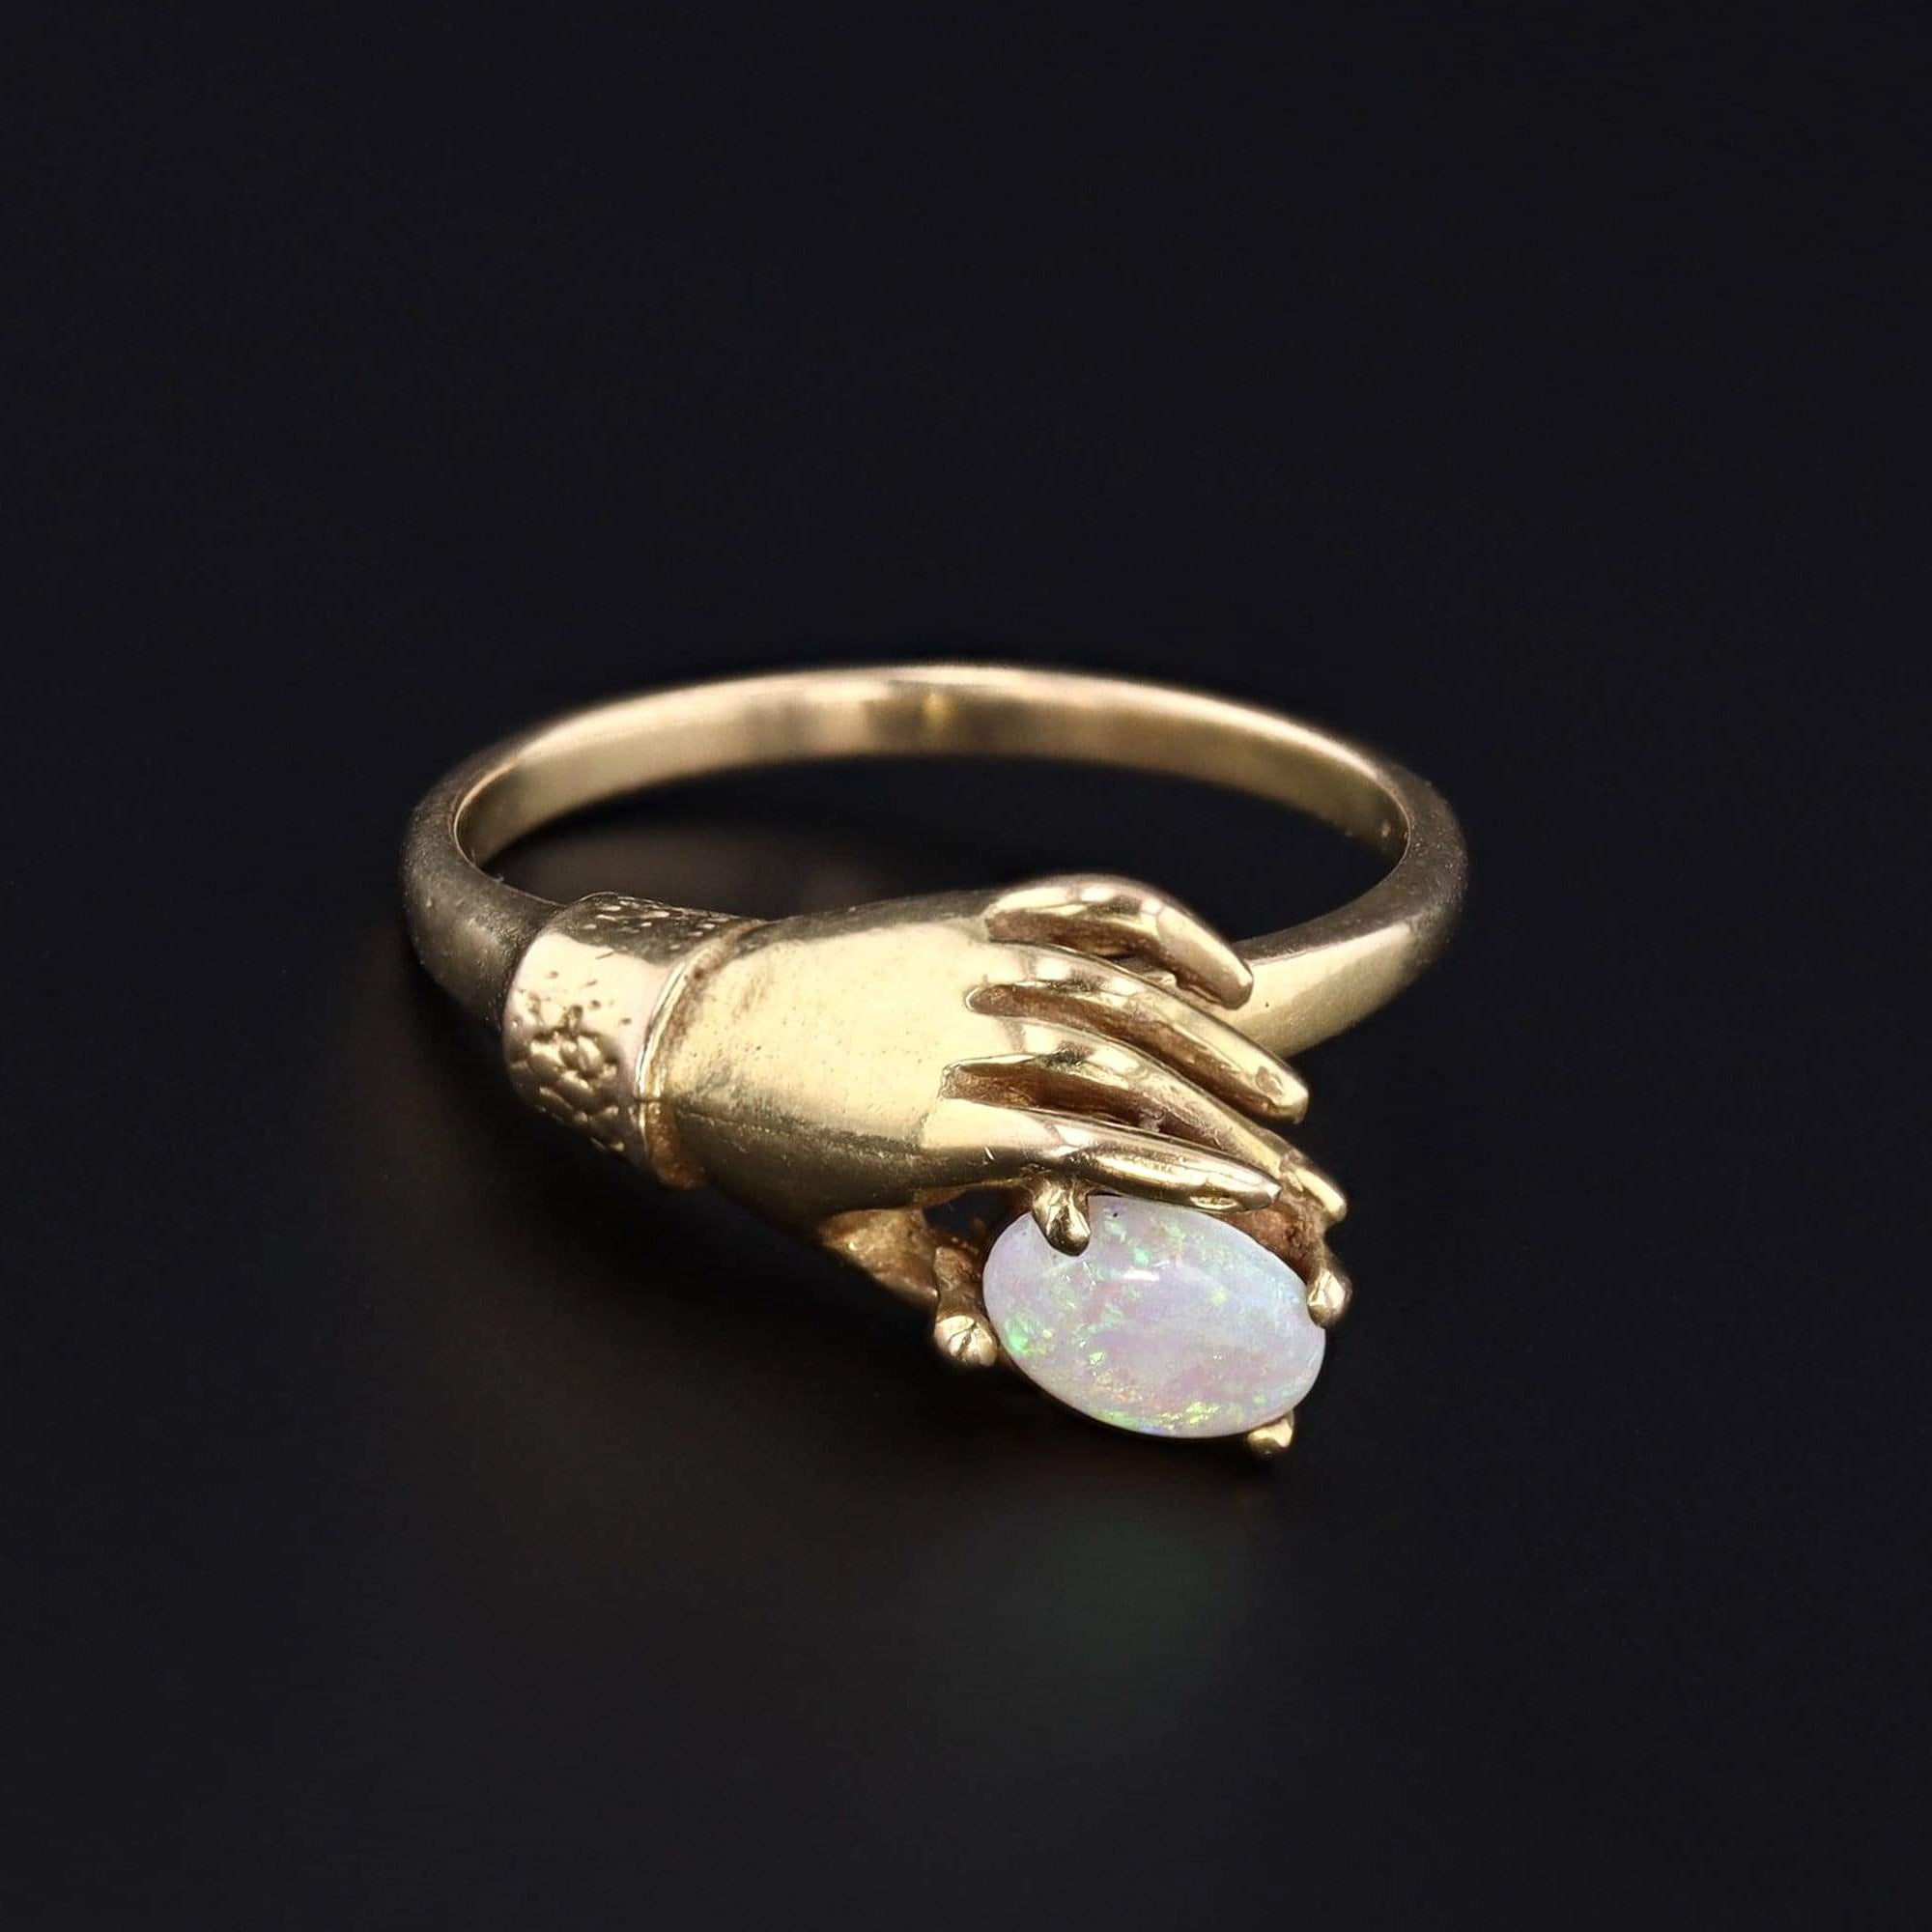 Vintage Opal in Hand Ring | 14k Gold Ring 